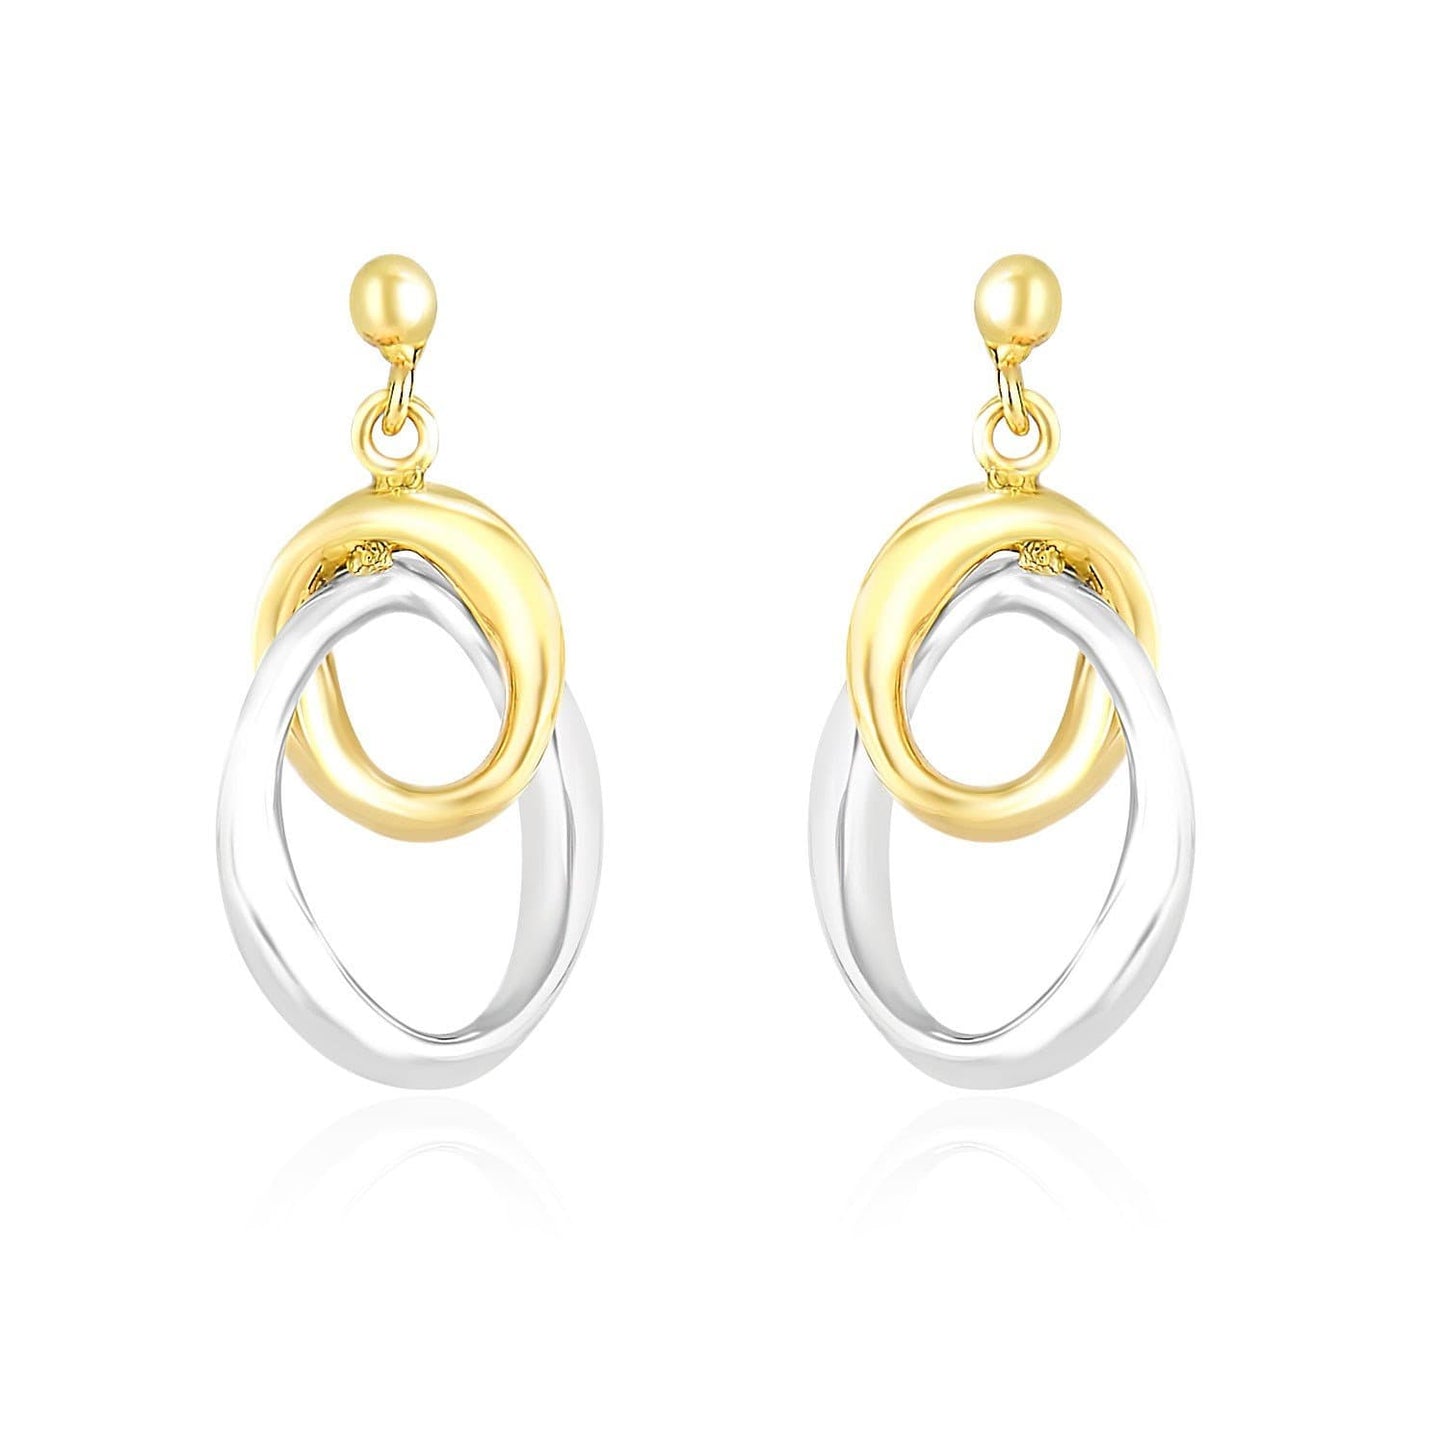 14k Two-Tone Gold Drop Earrings with Interlaced Oval Sections